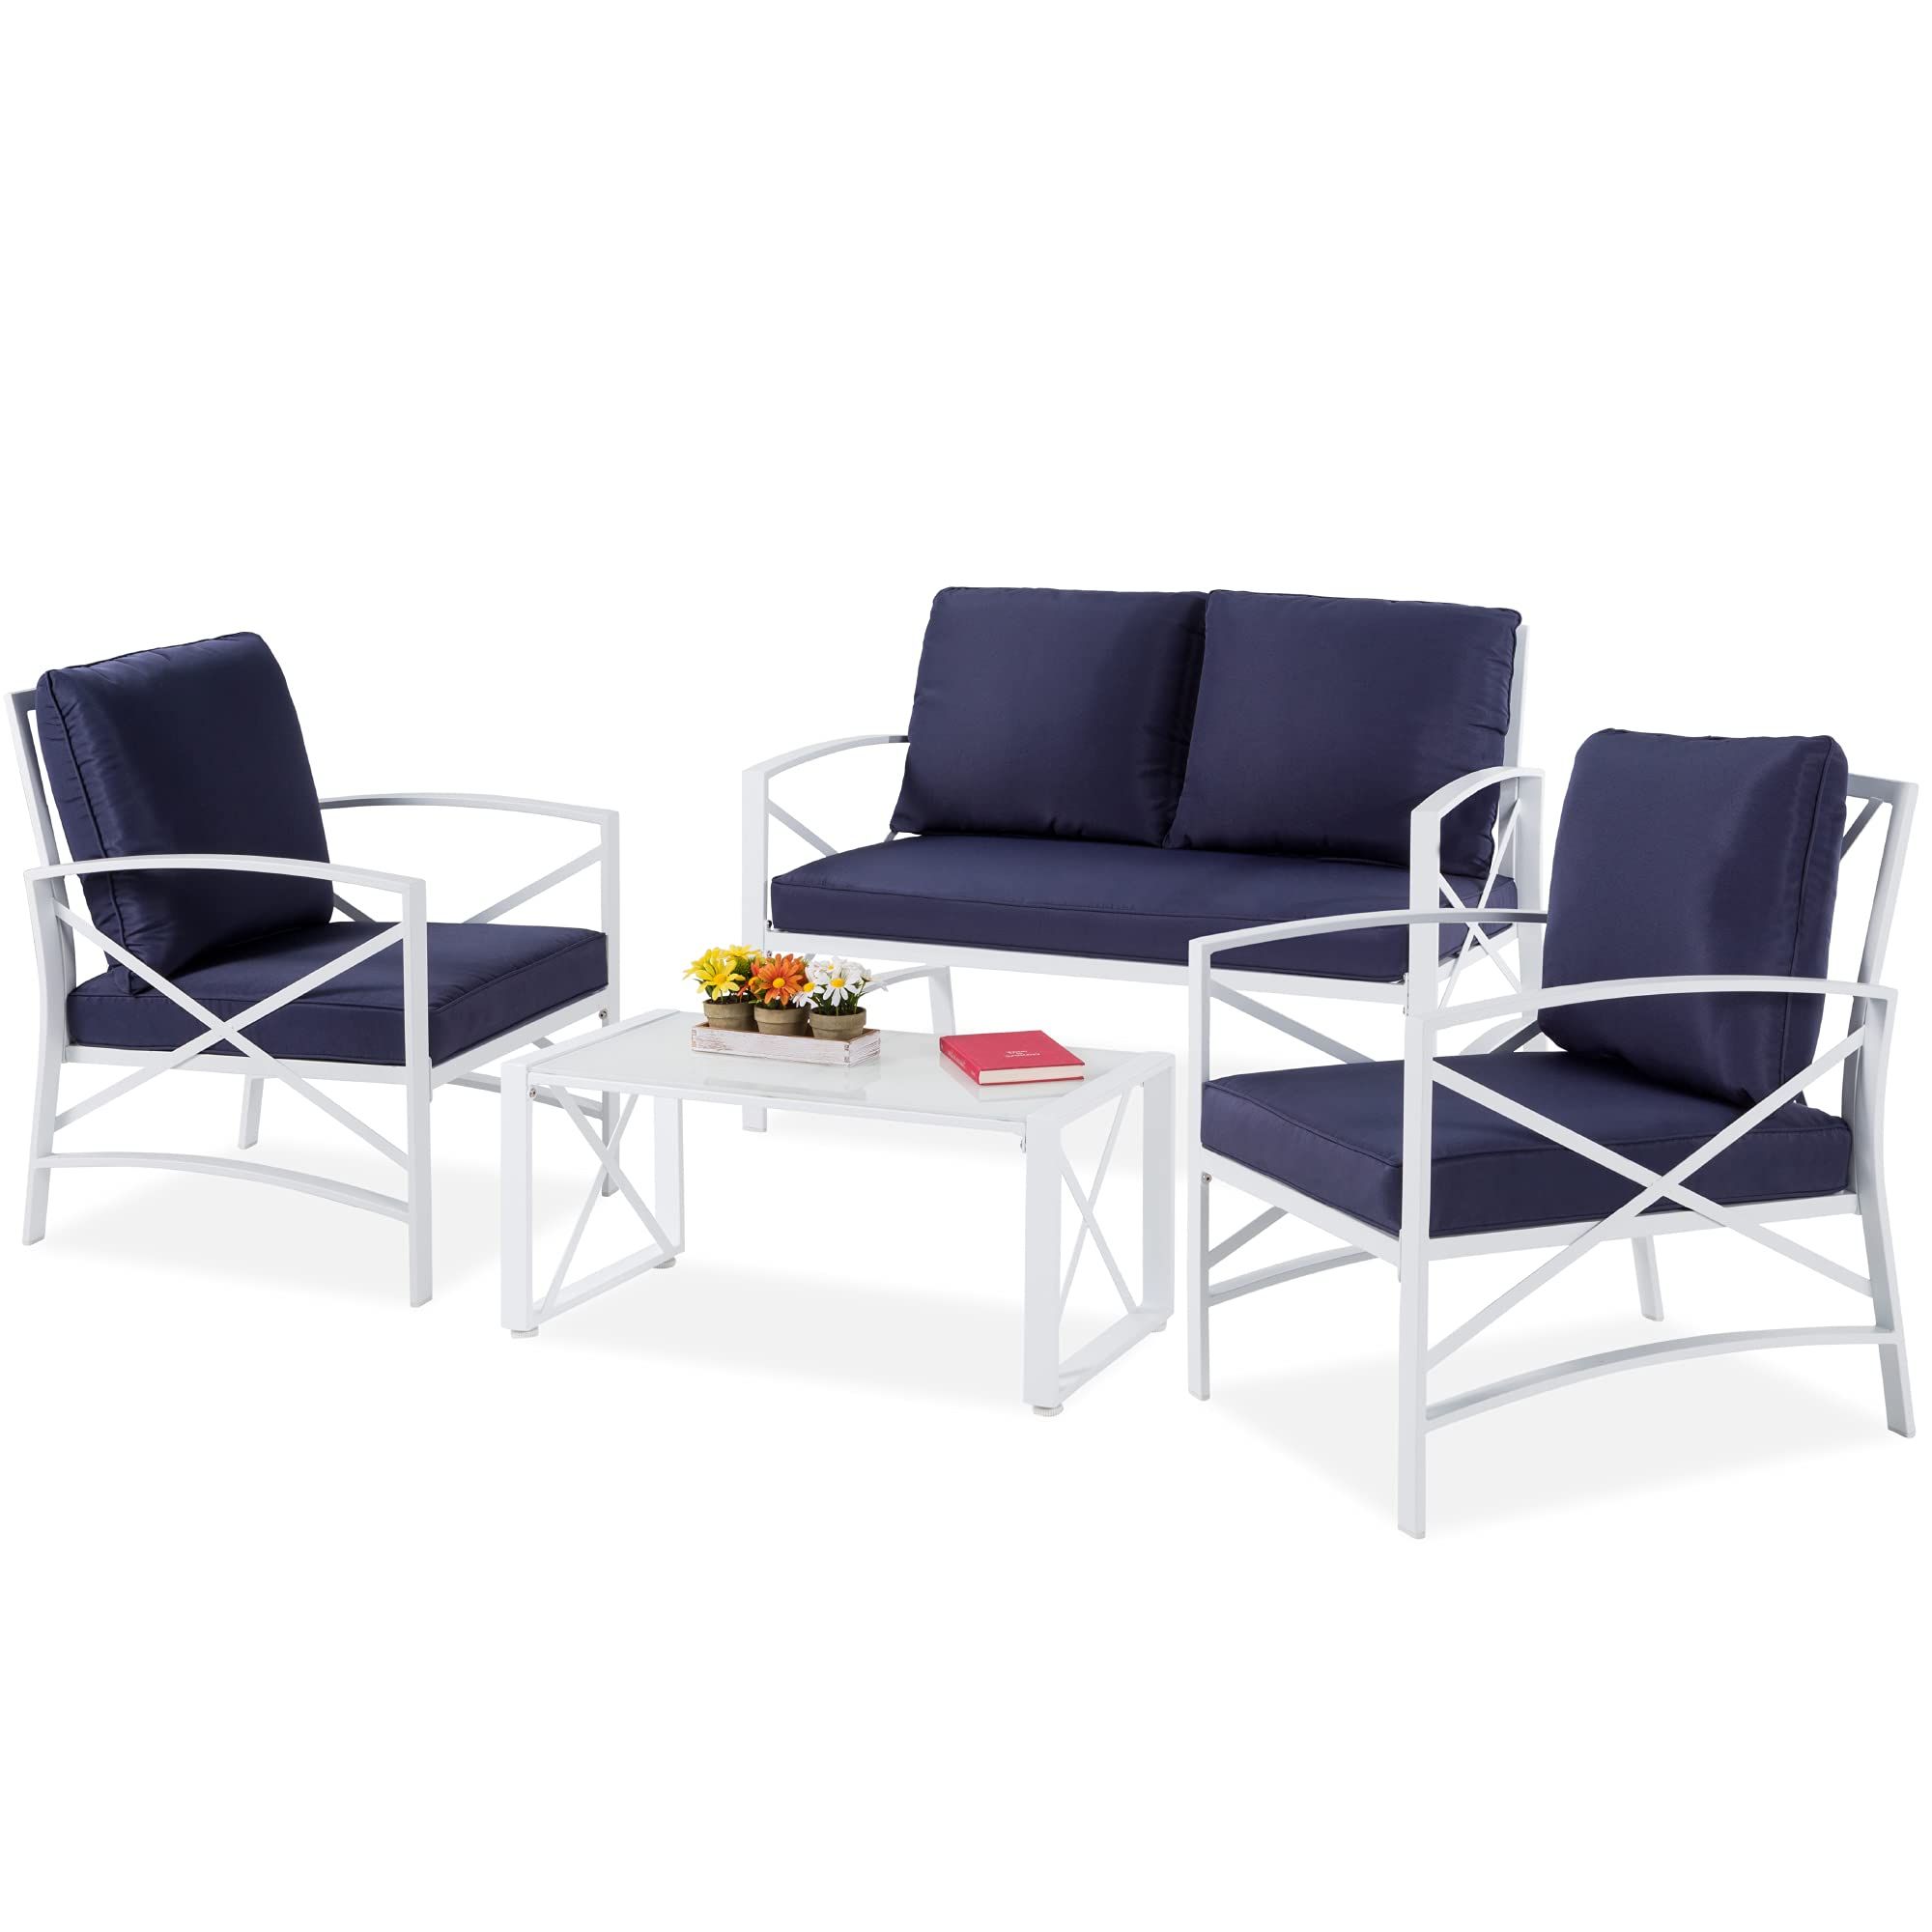 Amazon: Best Choice Products 4 Piece Patio Conversation Set, Cushioned  Metal Outdoor Furniture For Lawn, Poolside, Deck W/ 4 Seats, Loveseat Sofa,  2 Chairs, Tempered Glass Top Coffee Table – White/navy Blue : Intended For Recent Cushioned Chair Loveseat Tables (View 9 of 15)